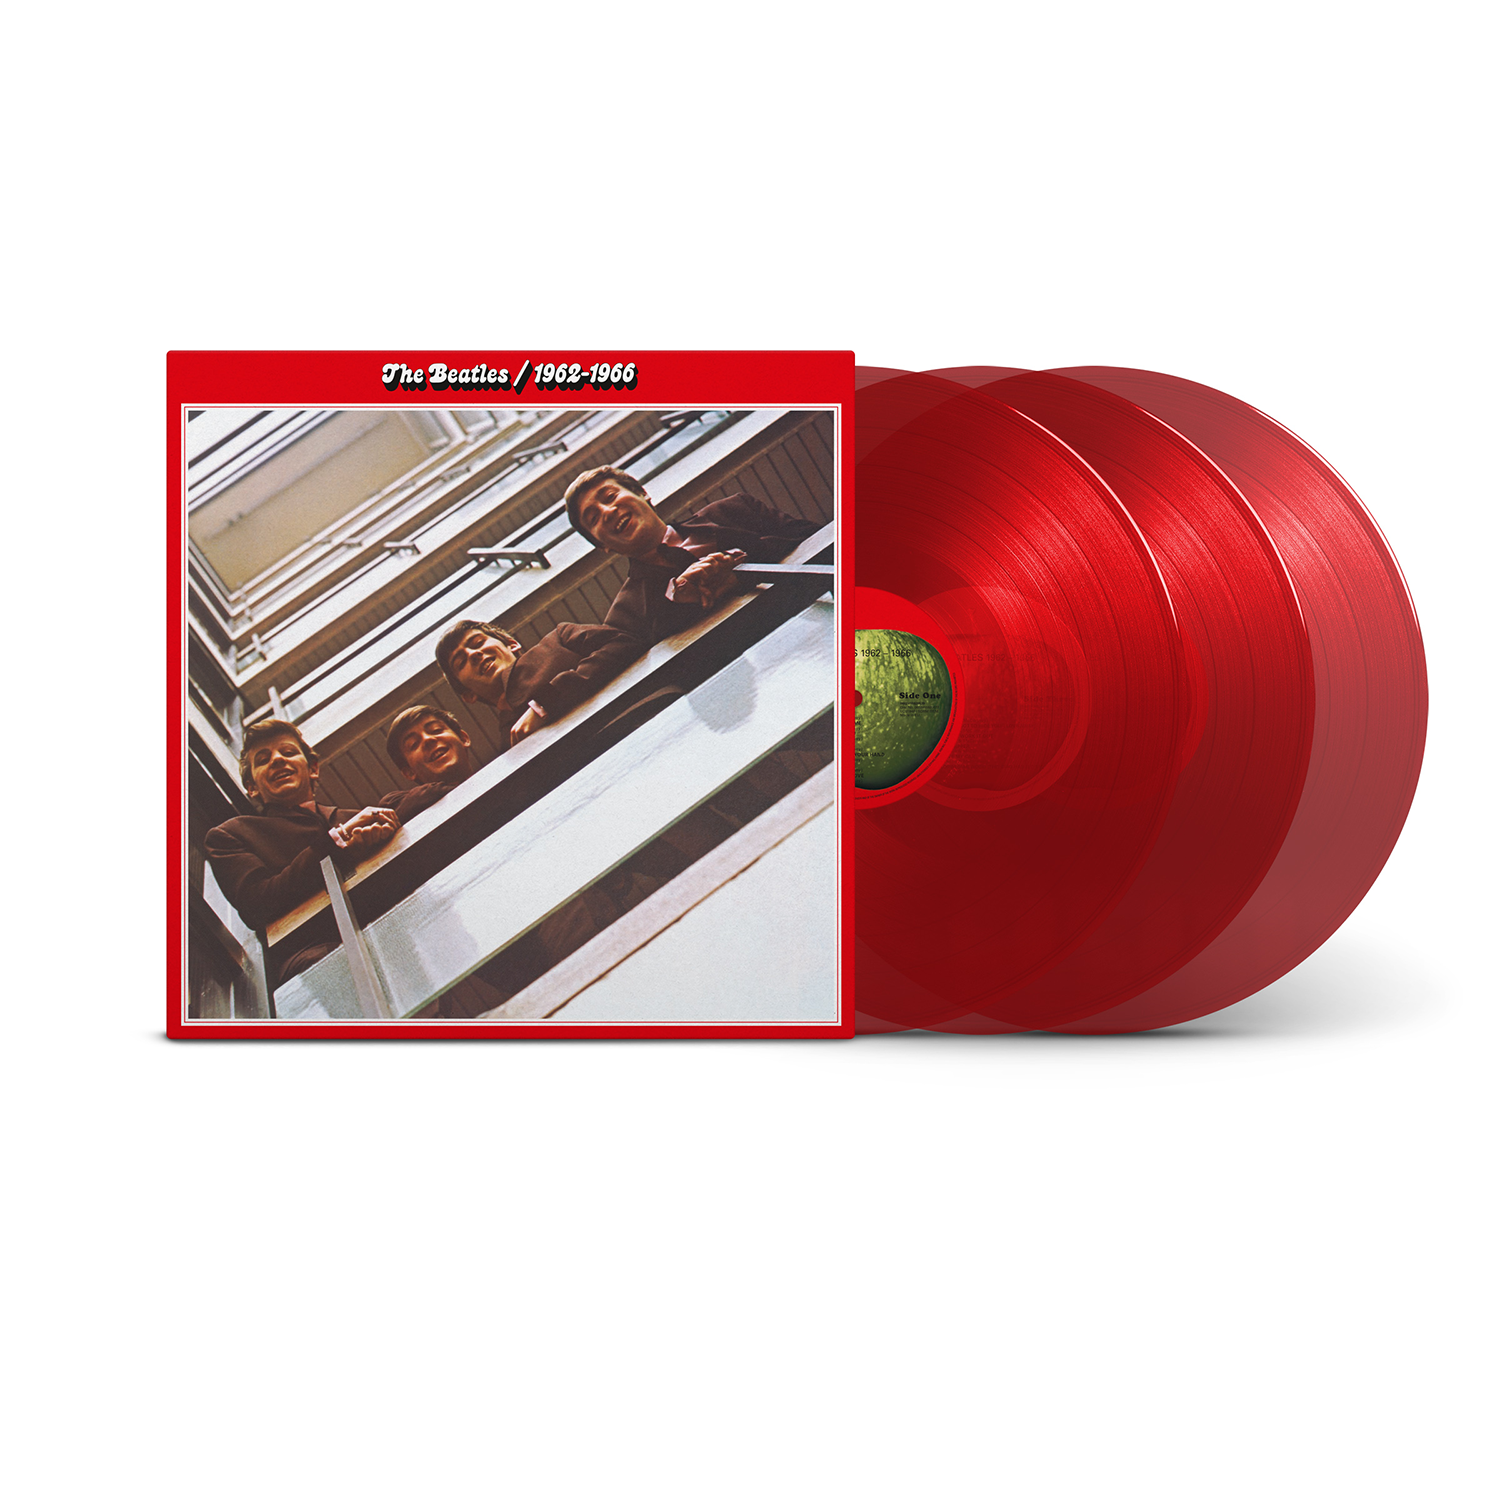 The Beatles 1962–1966 (2023 Edition): 3LP Red Album (Exclusive Red Vinyl) + 3LP Blue Album 1967-1970 (Exclusive Blue Vinyl)